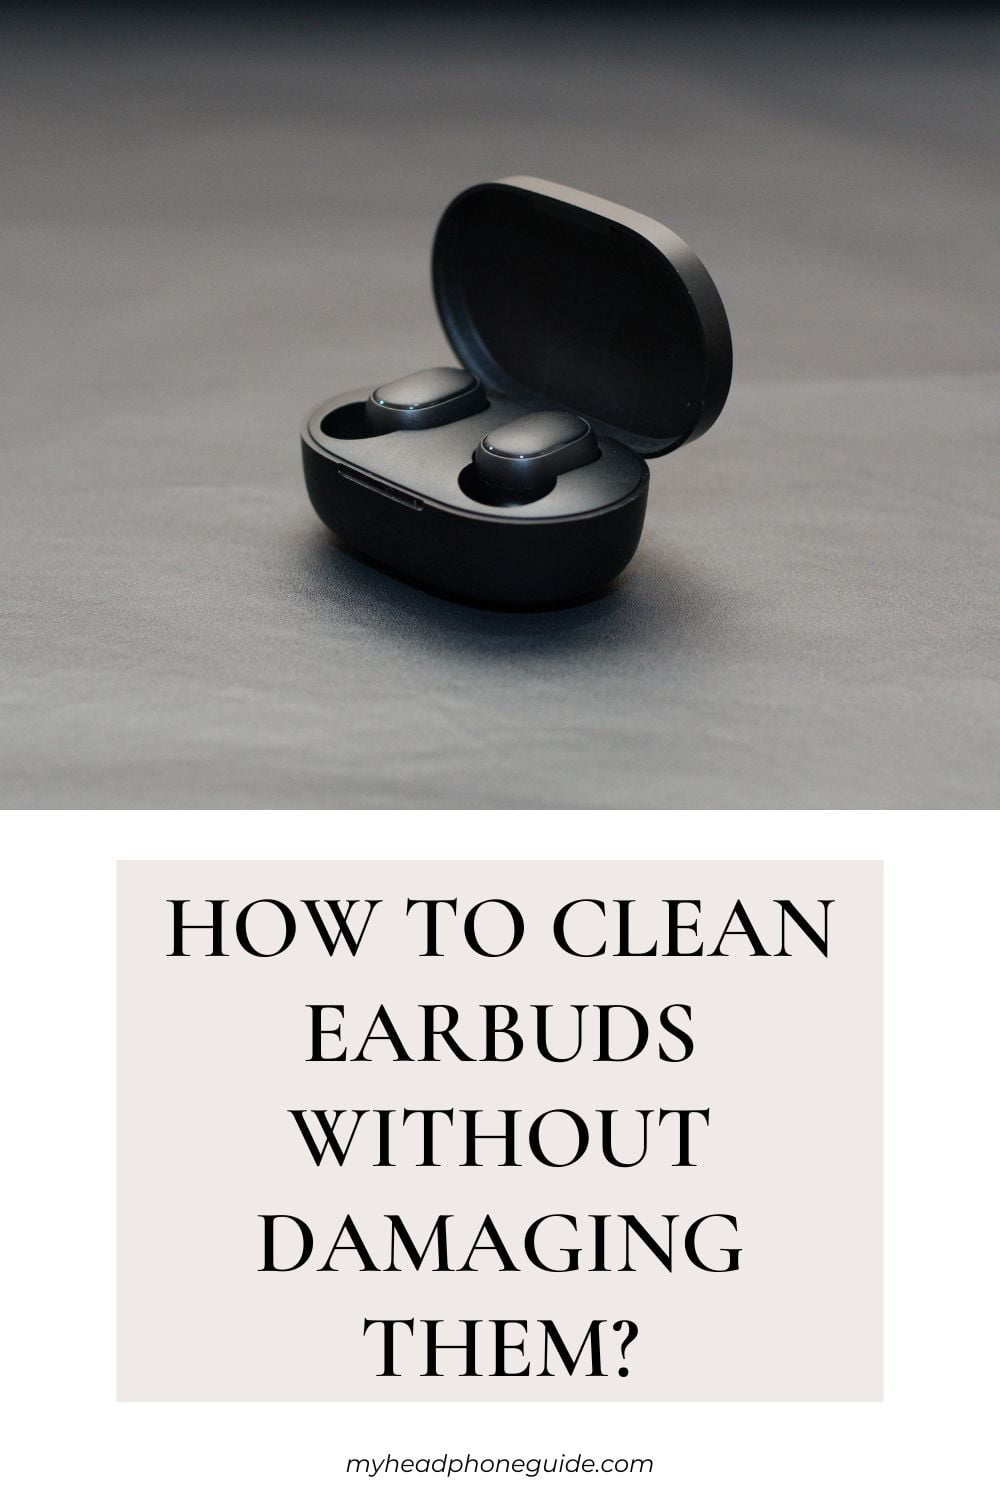 How To Clean Earbuds Without Damaging Them?